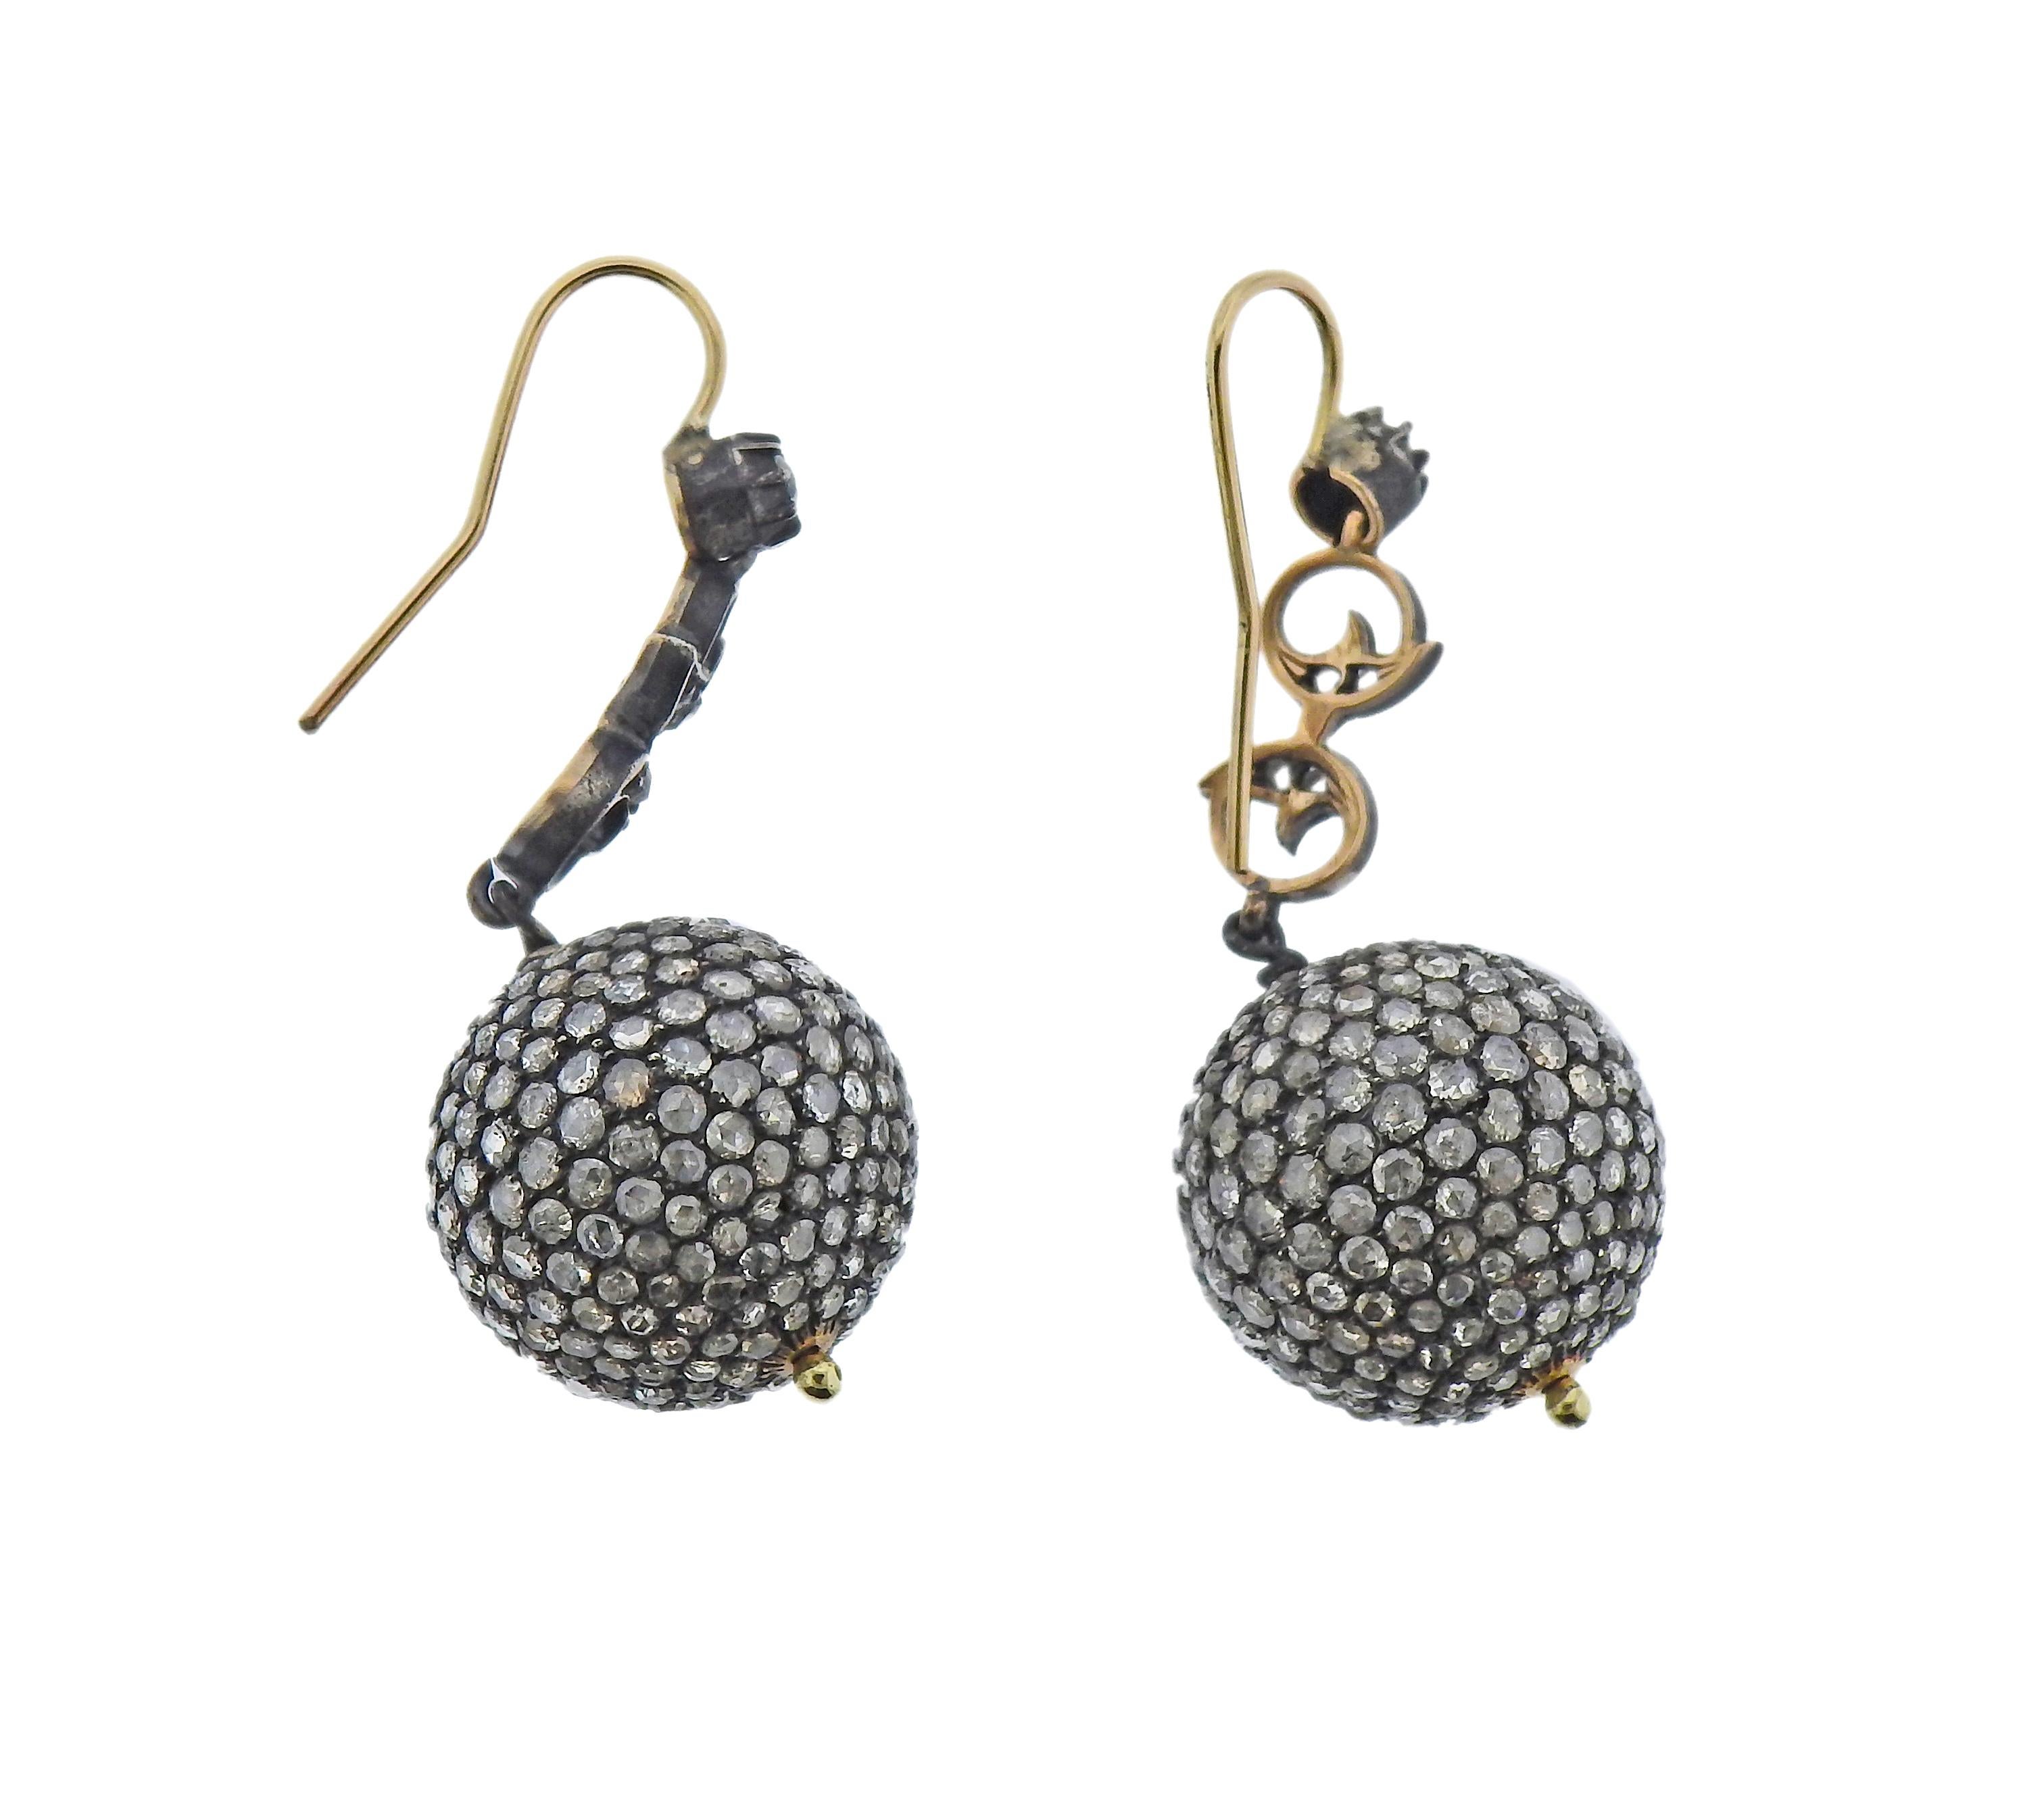 Pair of 14k gold and silver drop ball earrings with rose cut diamonds. Earrings are 46mm long, balls are 19mm in diameter. Weight - 11.6 grams. 